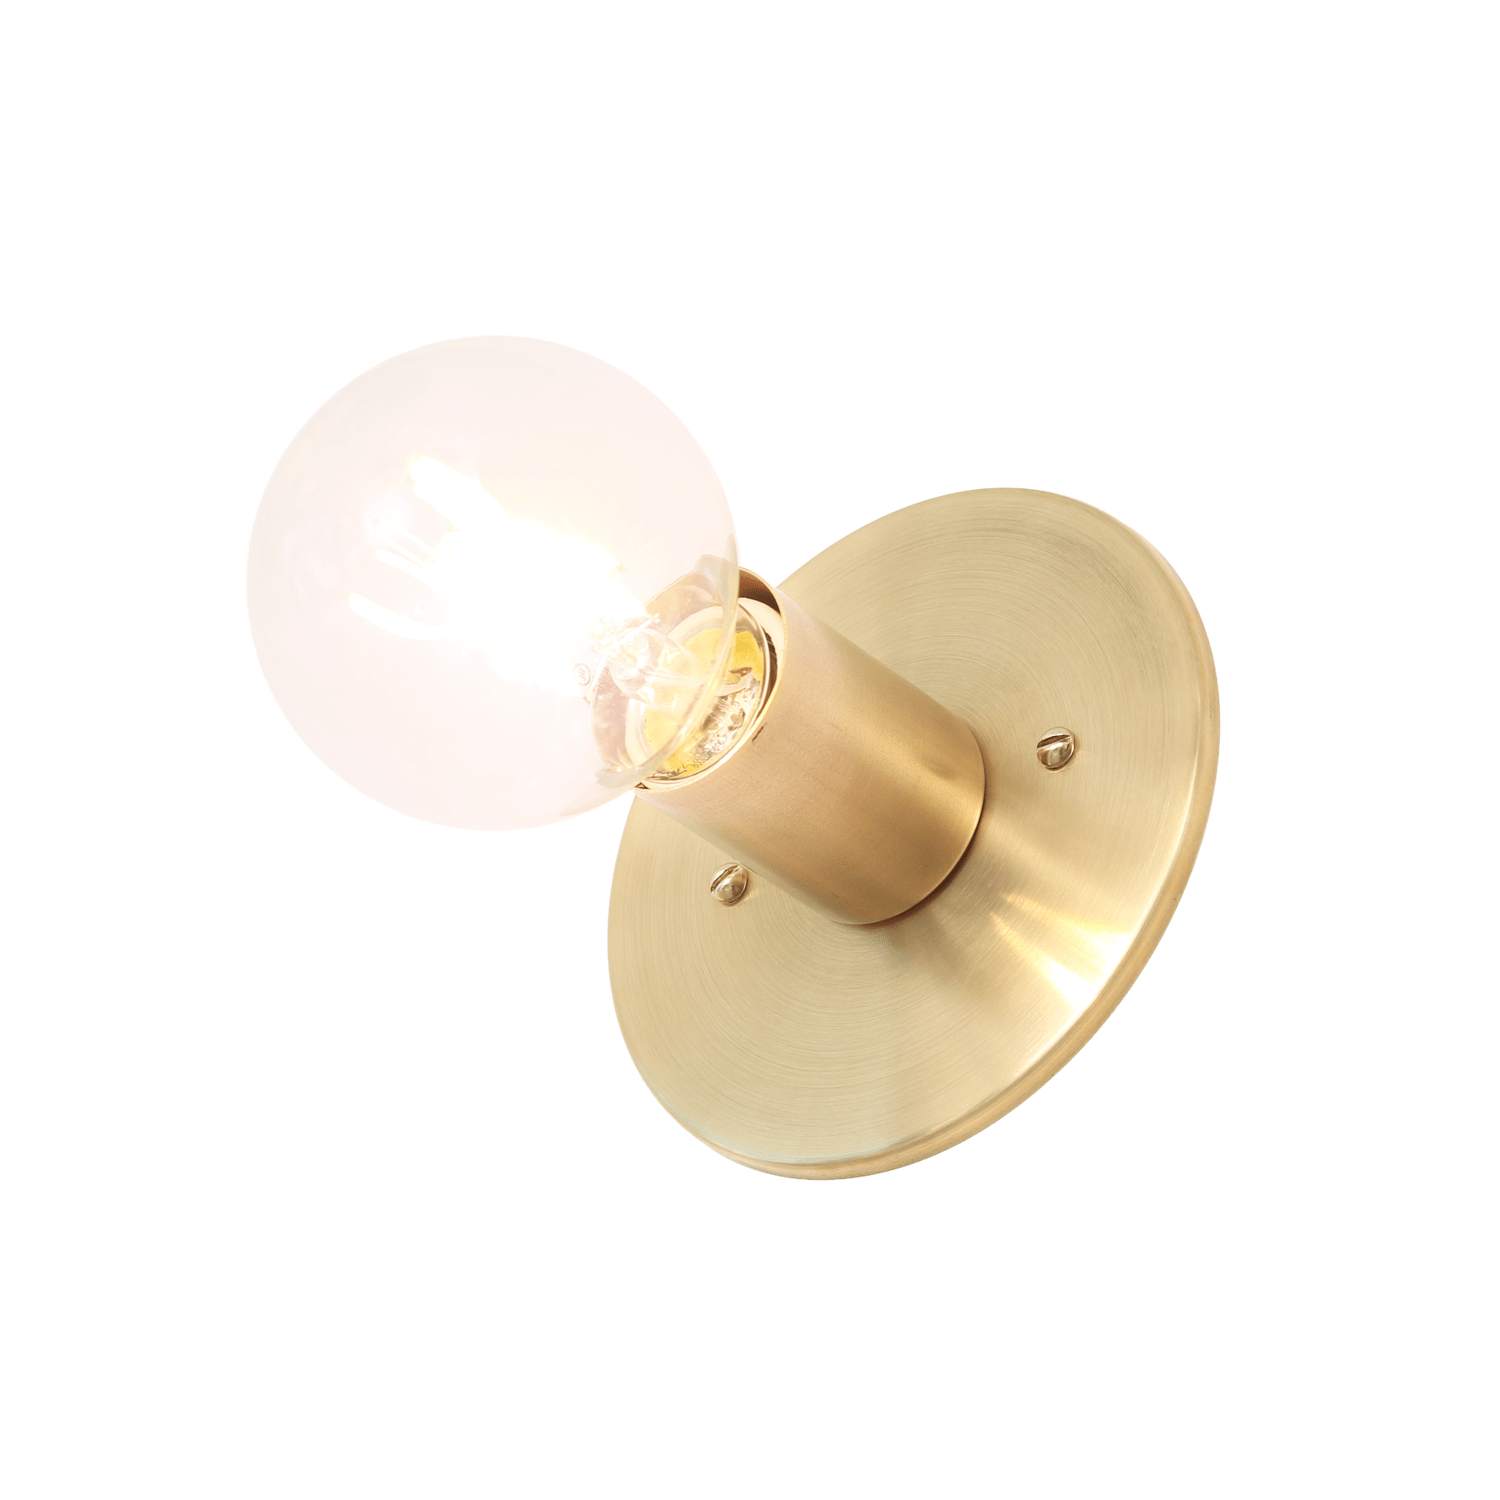 Wallace Hardwired Wall Lamp - onefortythree